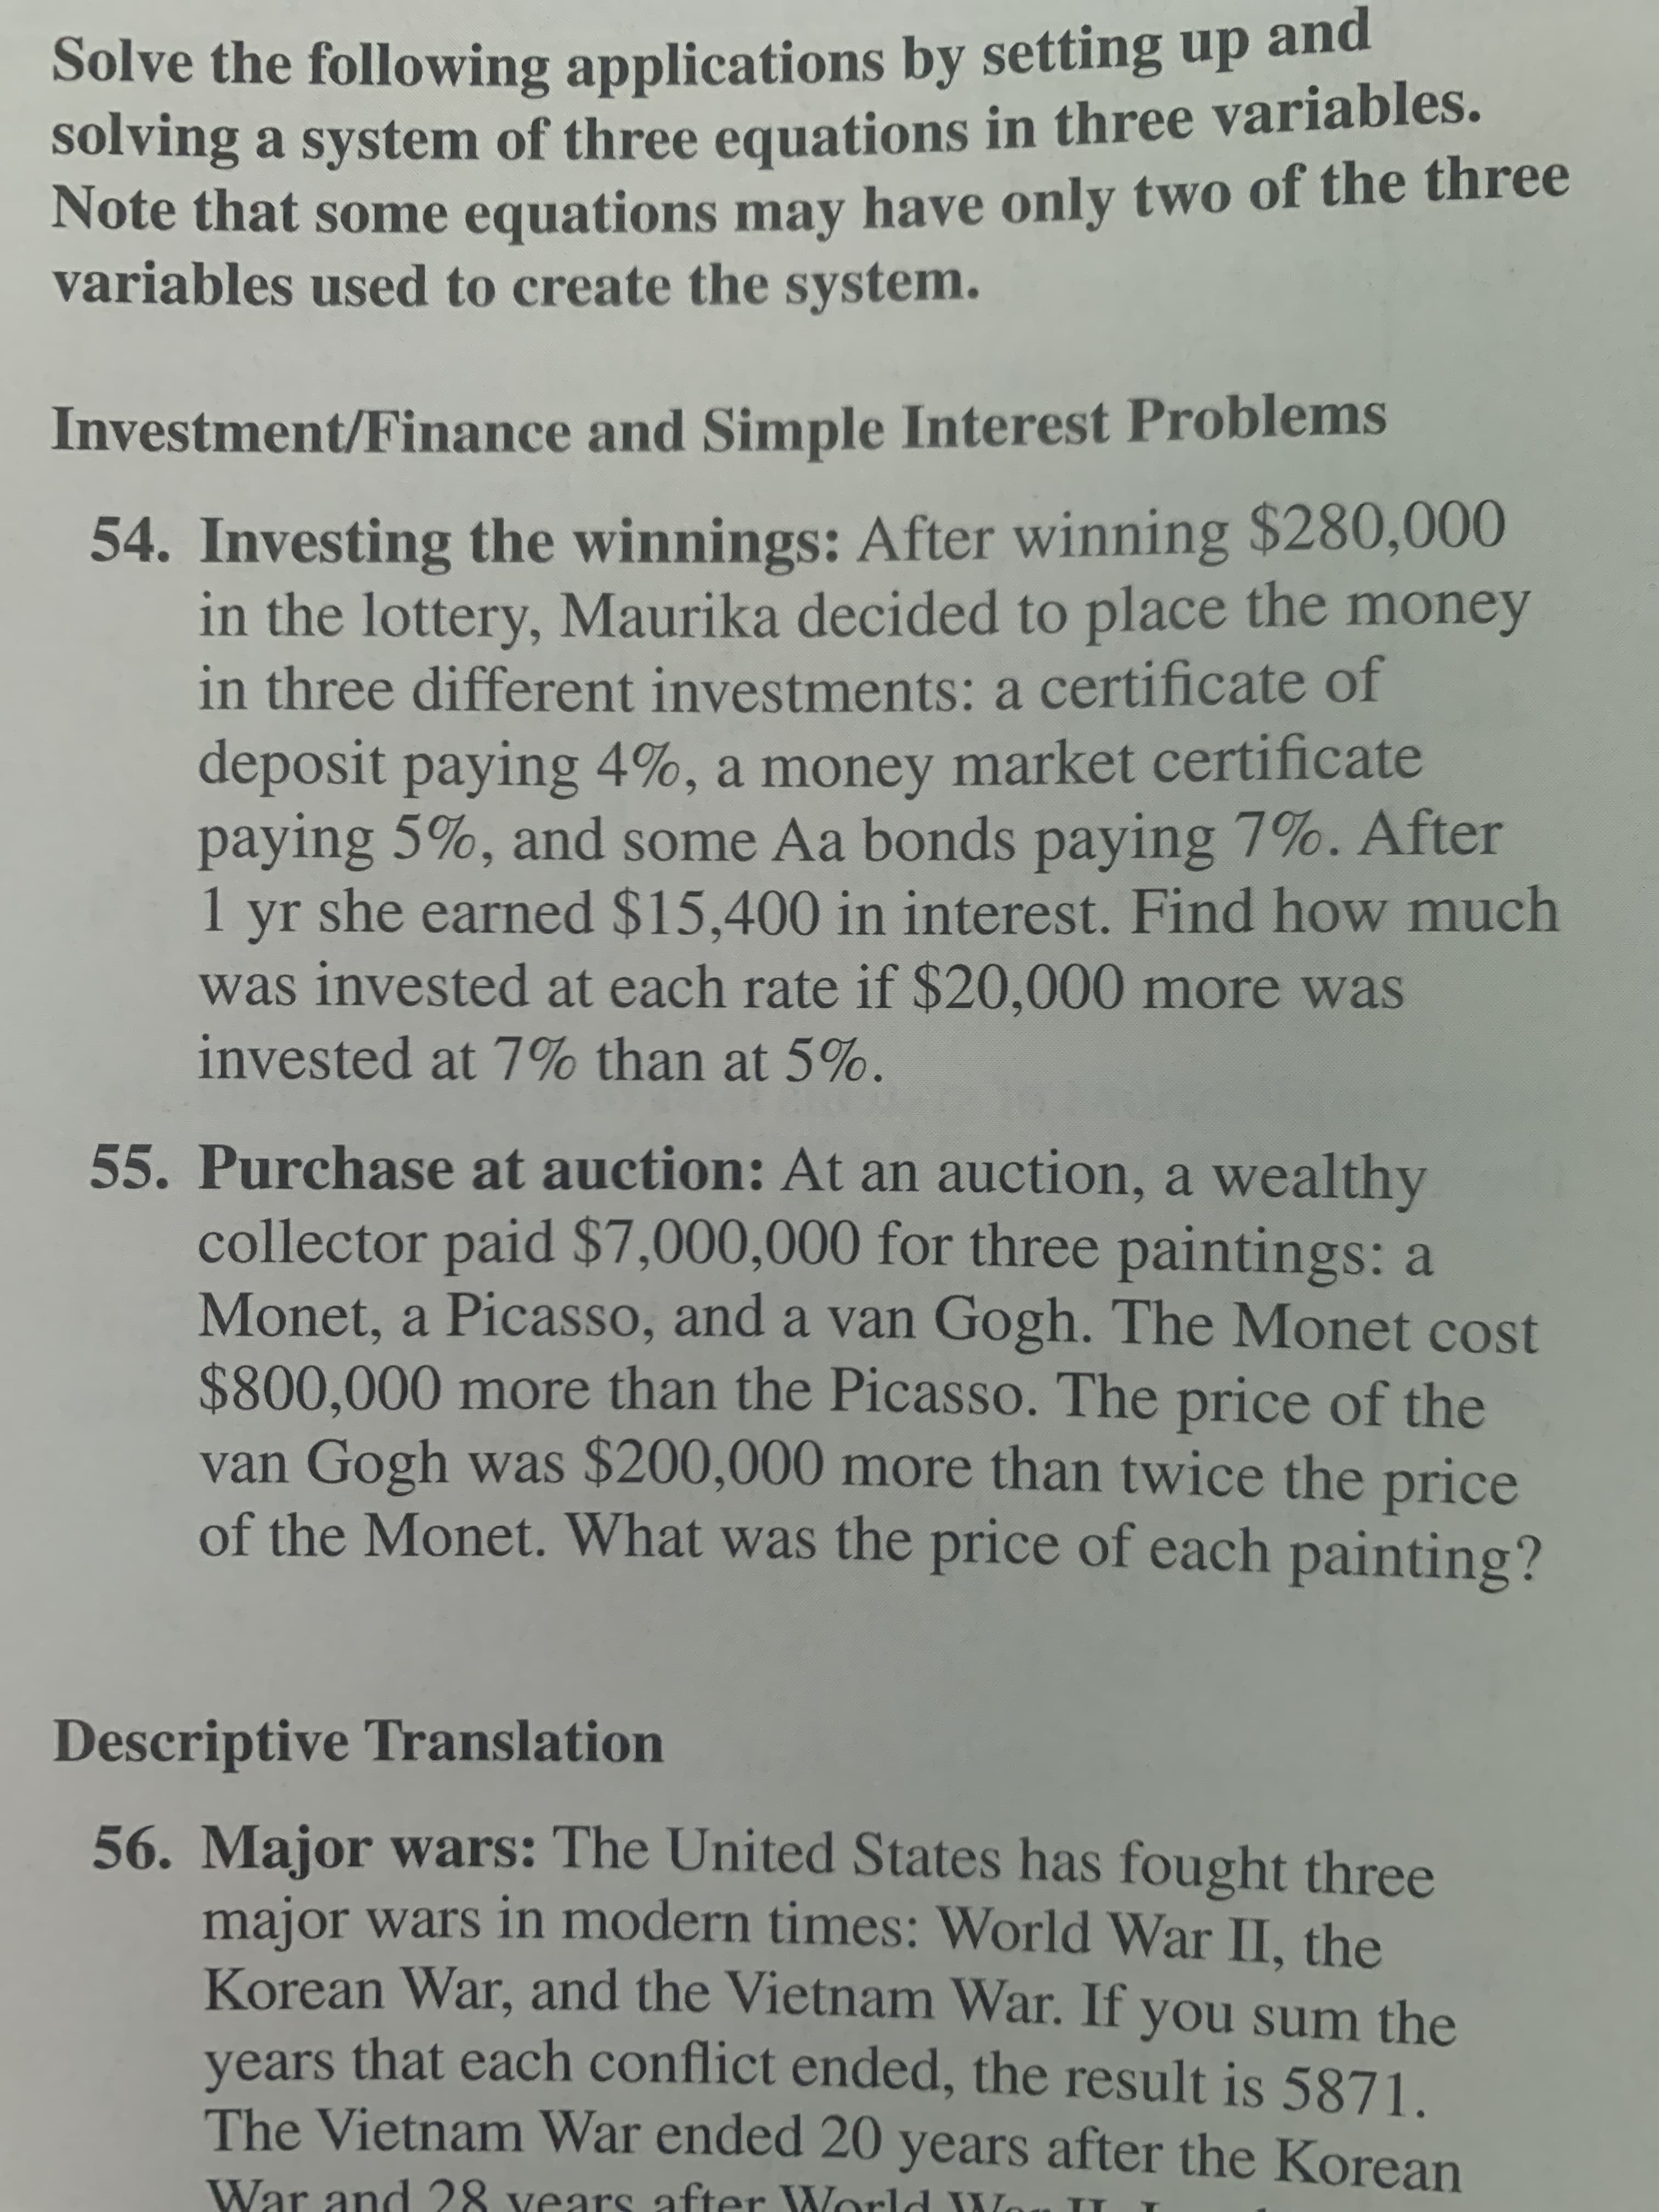 Solve the following applications by setting up and
solving a system of three equations in three variables.
Note that some equations may have only two of the three
variables used to create the system.
Investment/Finance and Simple Interest Problems
54. Investing the winnings: After winning $280,000
in the lottery, Maurika decided to place the money
in three different investments: a certificate of
deposit paying 4%, a money market certificate
paying 5%, and some Aa bonds paying 7%. After
1
she earned $15,400 in interest. Find how much
yr
was invested at each rate if $20,000 more was
invested at 7% than at 5%.
55. Purchase at auction: At an auction, a wealthy
collector paid $7,000,000 for three paintings: a
Monet, a Picasso, and a van Gogh. The Monet cost
$800,000 more than the Picasso. The price of the
van Gogh was $200,000 more than twice the price
of the Monet. What was the price of each painting?
Descriptive Translation
56. Major wars: The United States has fought three
major wars in modern times: World War II, the
Korean War, and the Vietnam War. If you sum the
years that each conflict ended, the result is 5871.
The Vietnam War ended 20 years after the Korean
War and 28 vears after World W
